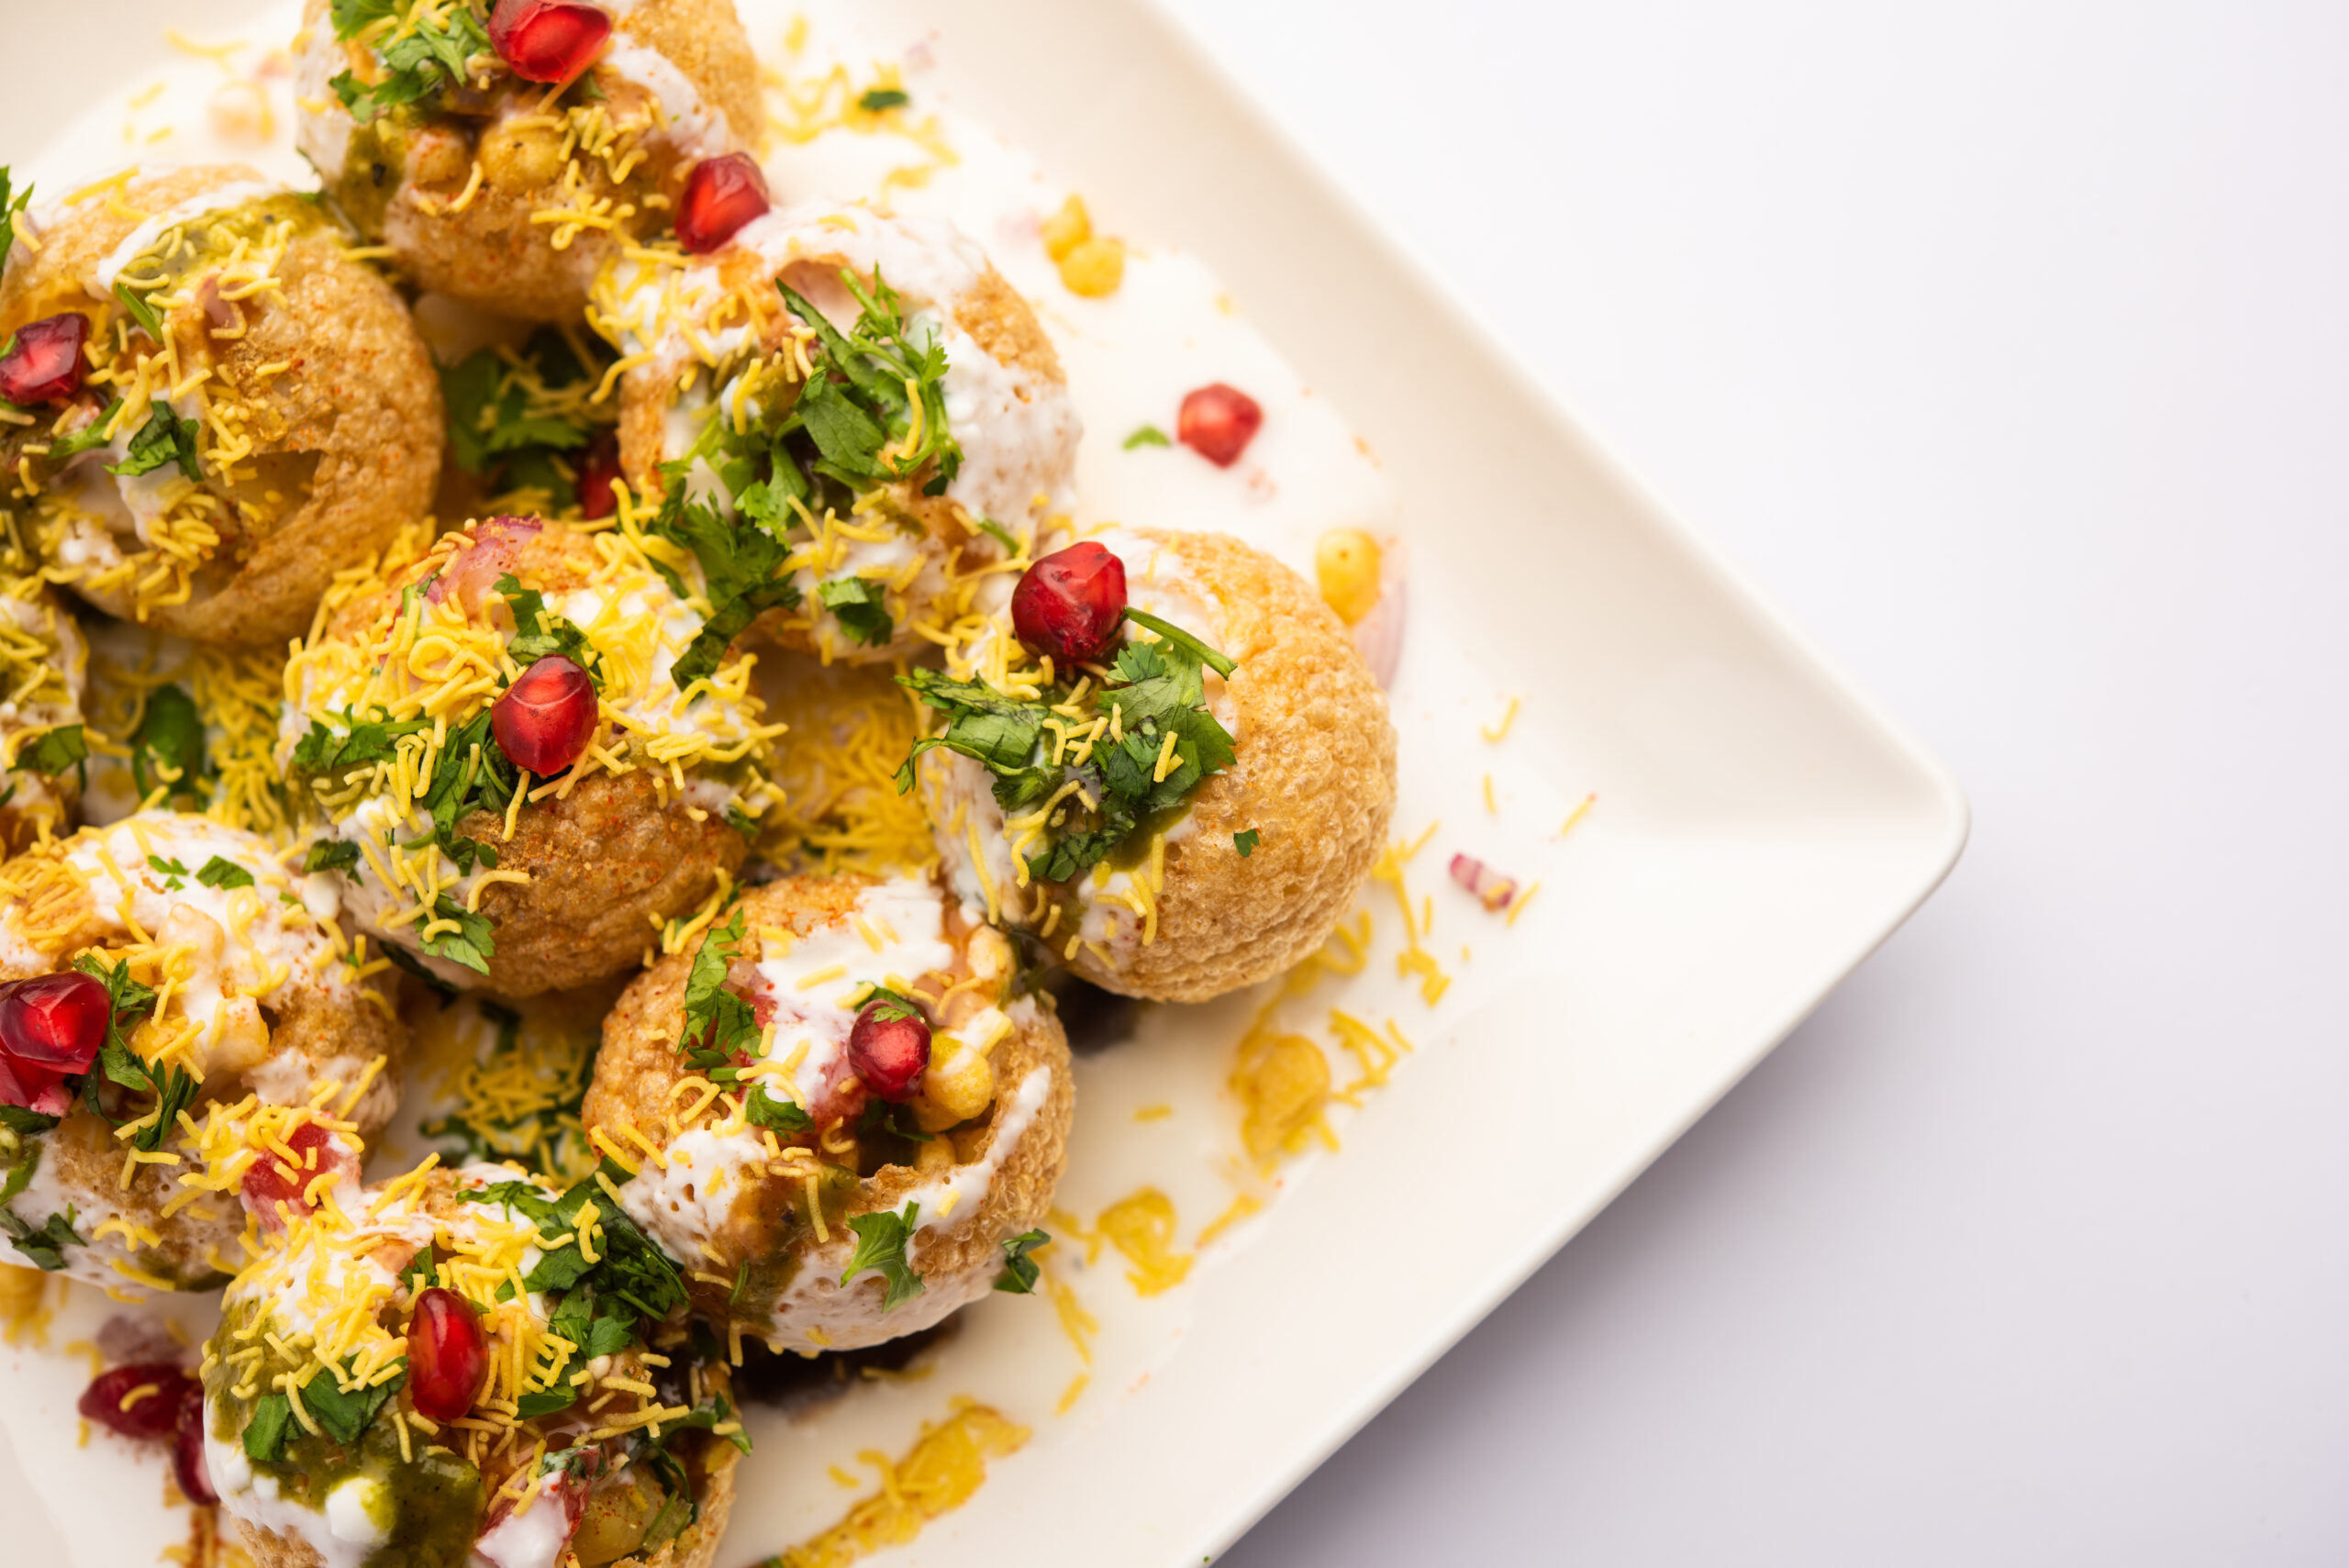 Top 7 Places To Have Chaat In Kolkata by Rahul Banerjee